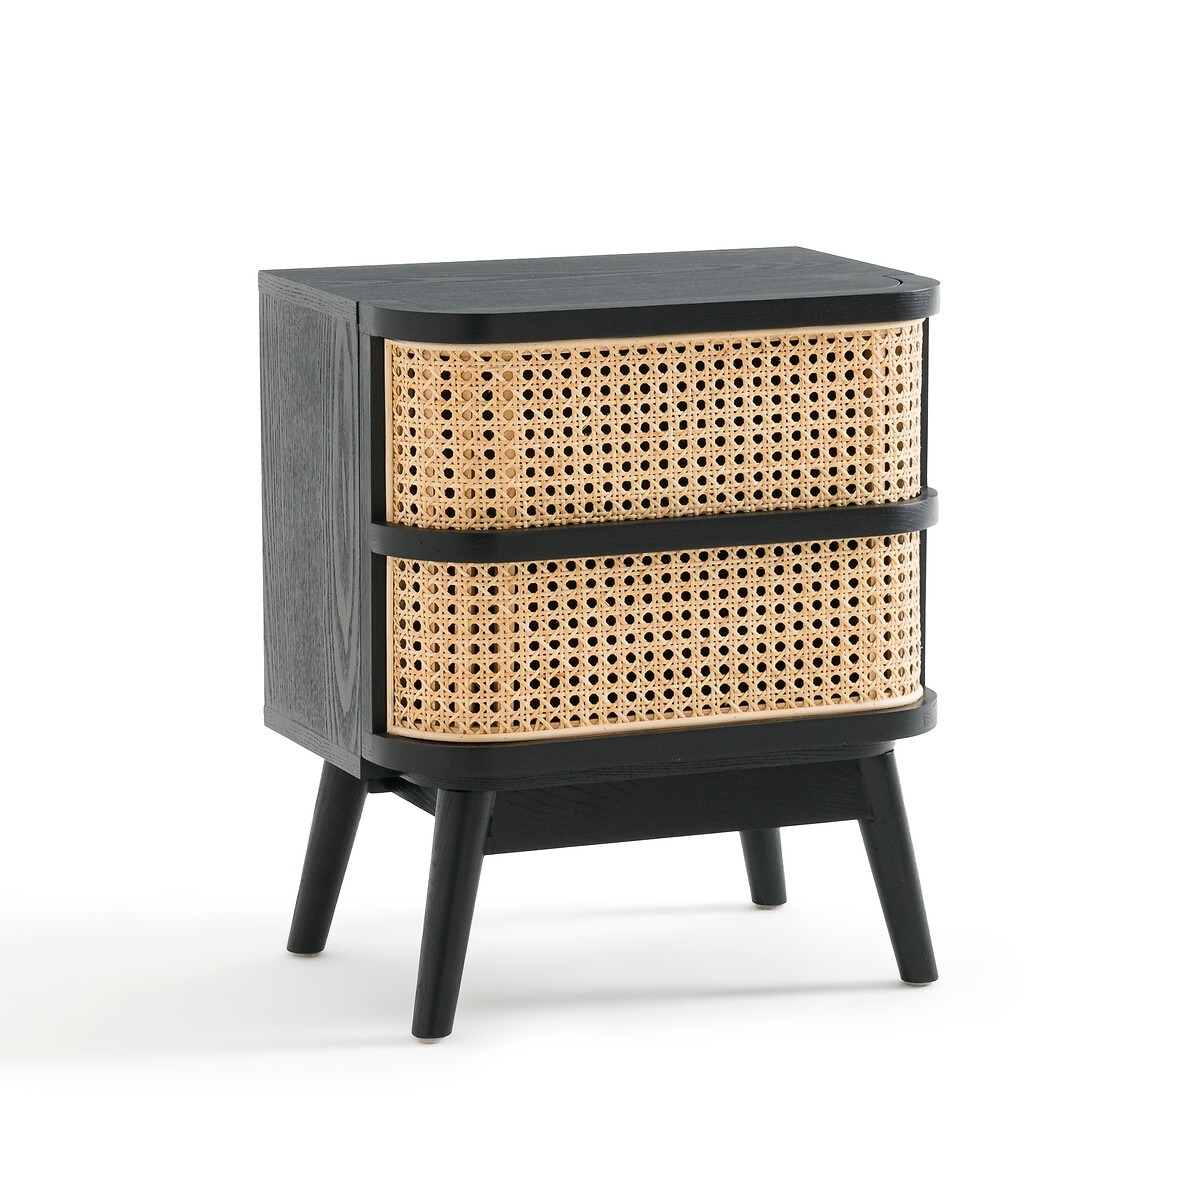 Laora Cane Bedside Table with 1 Drawer - image 1